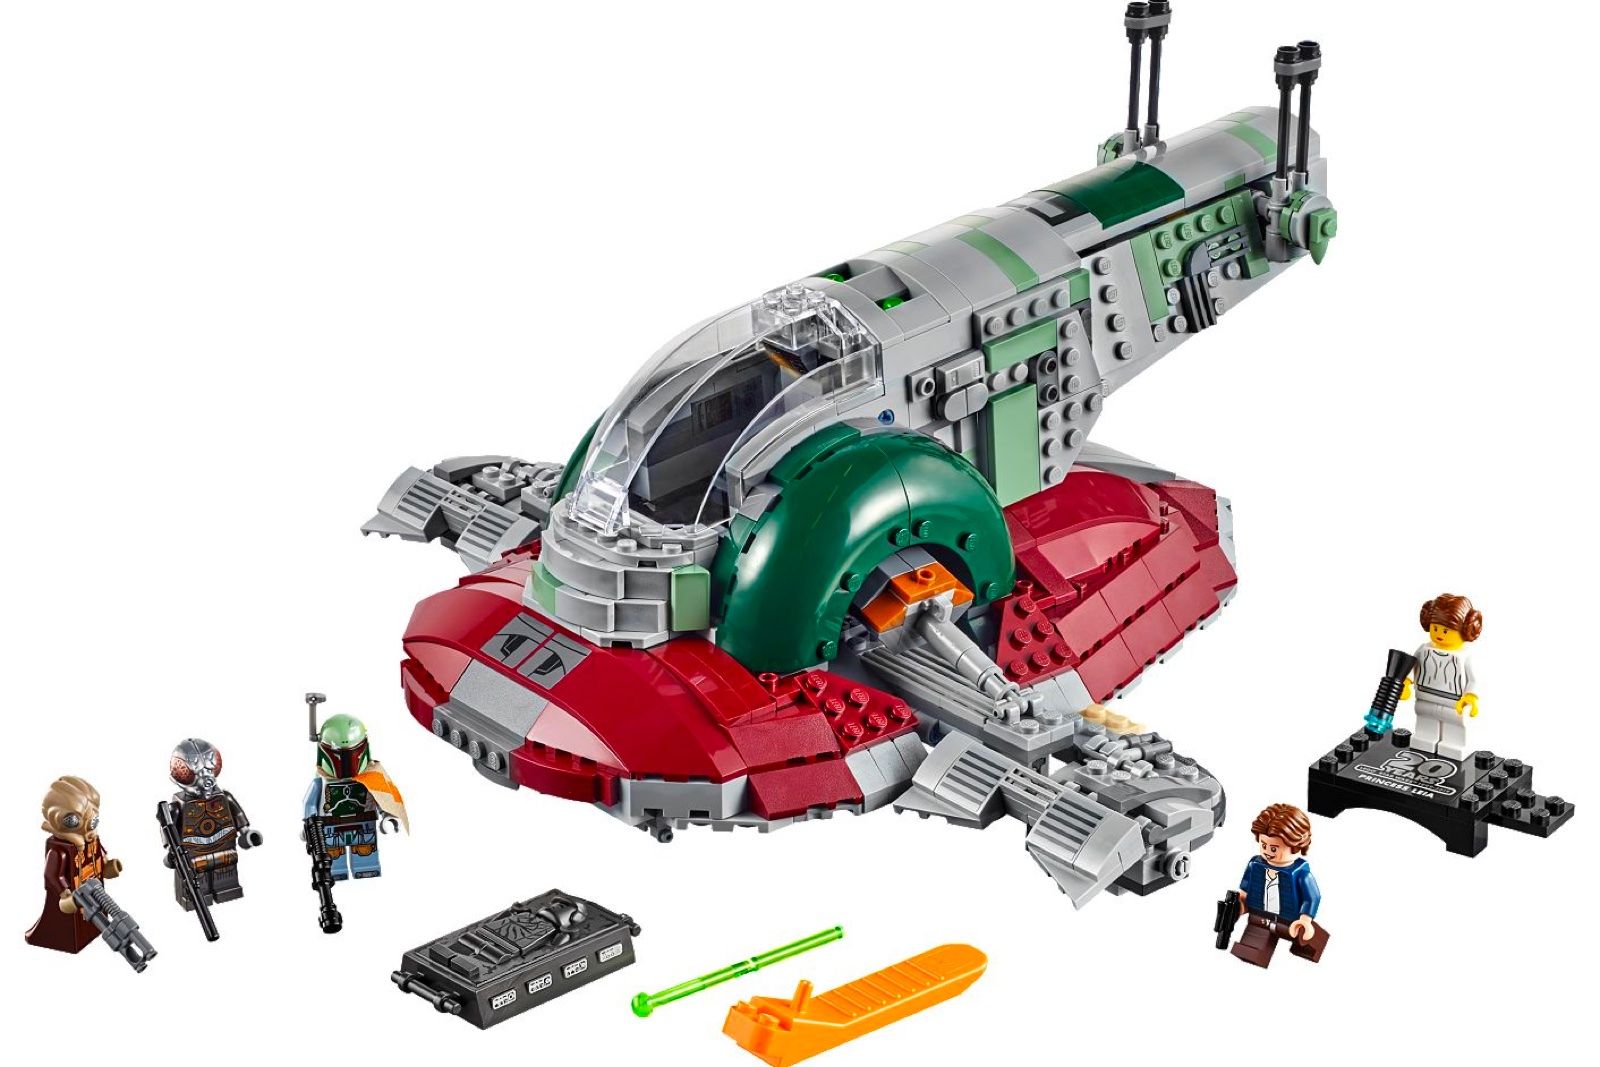 10 best Lego sets 2020 Our favourite Star Wars, Technic, City, Frozen II sets and more image 10